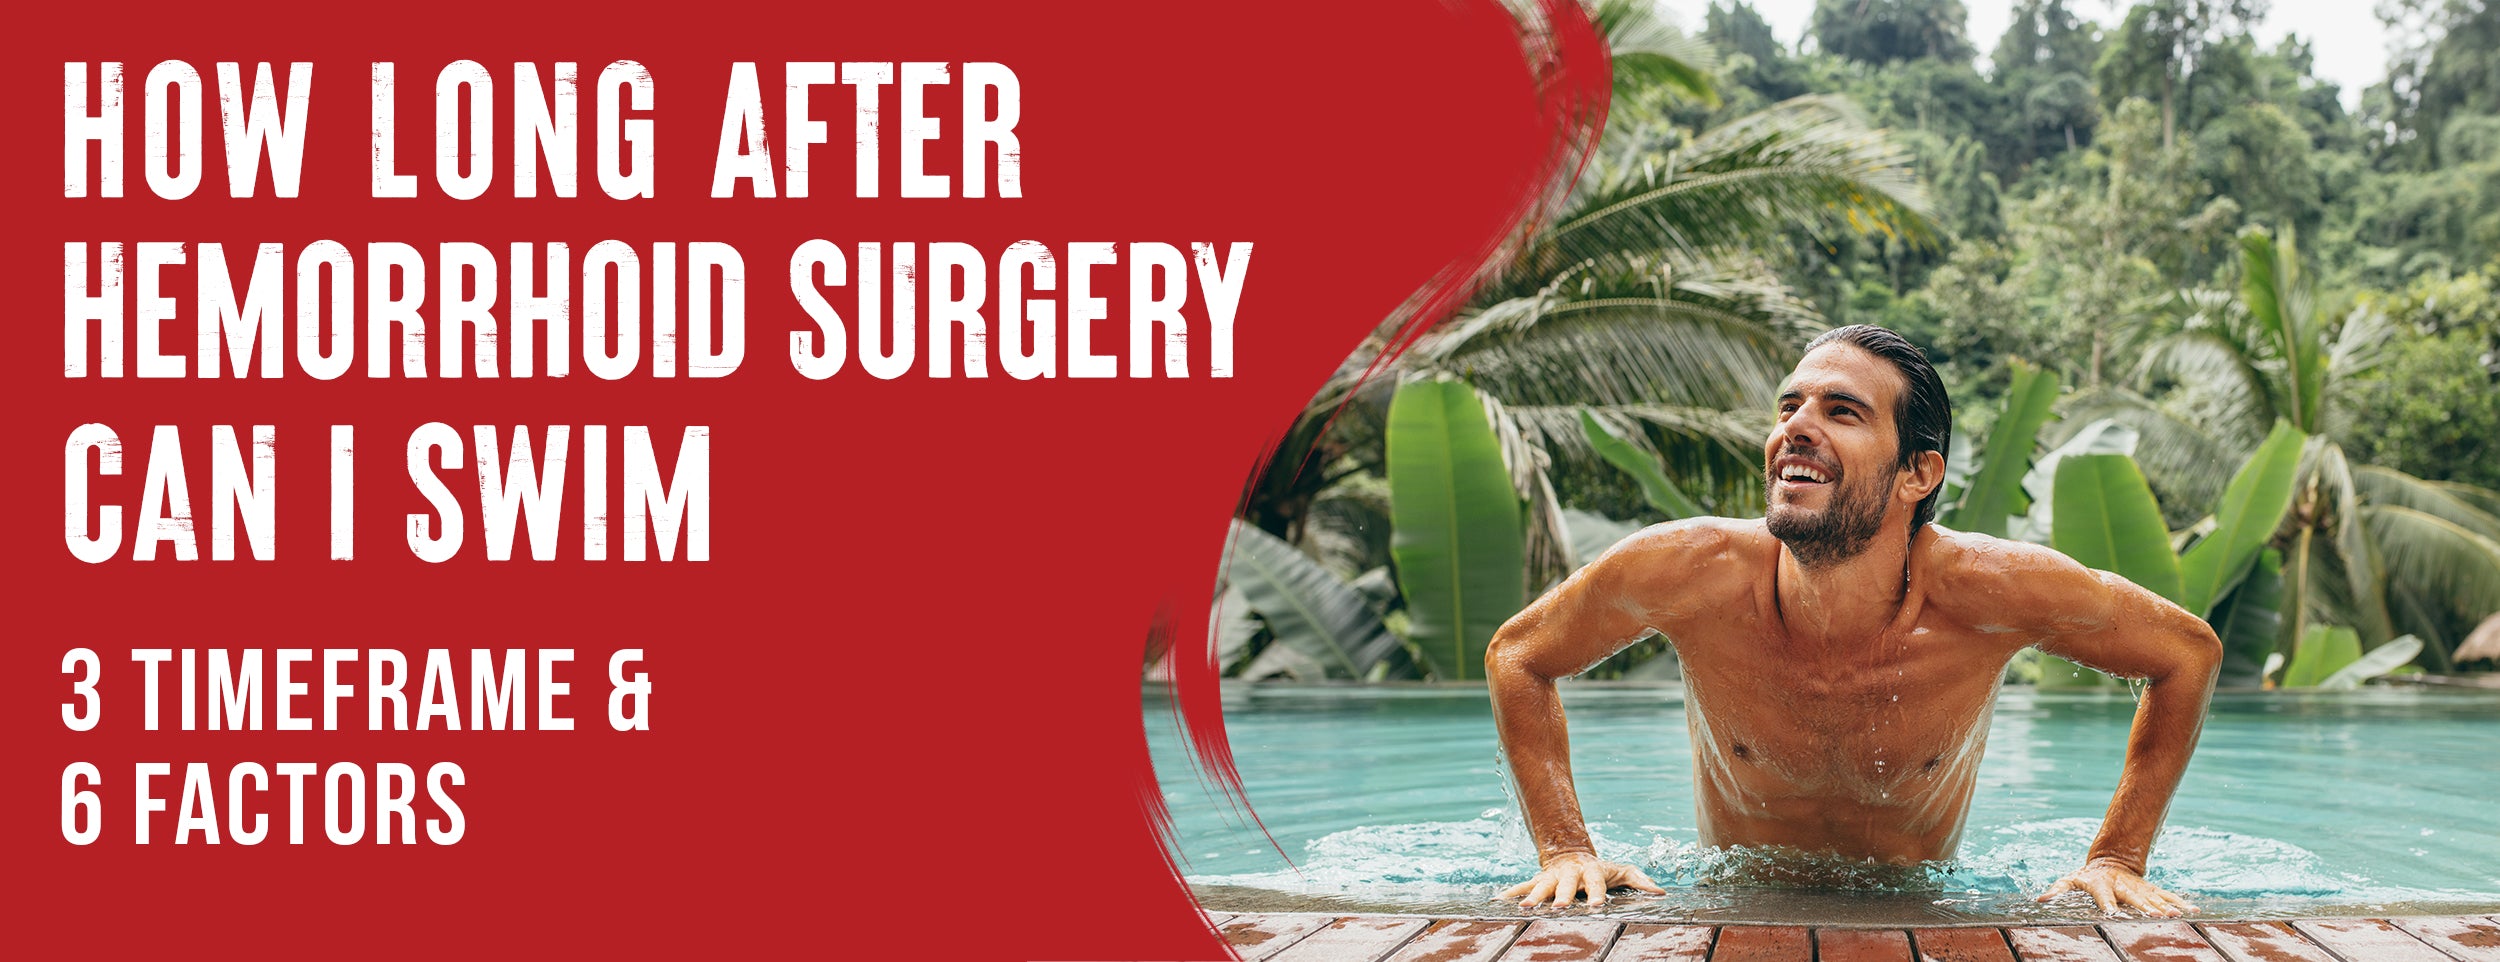 Considering 6 Factors When Swimming After Hemorrhoid Surgery